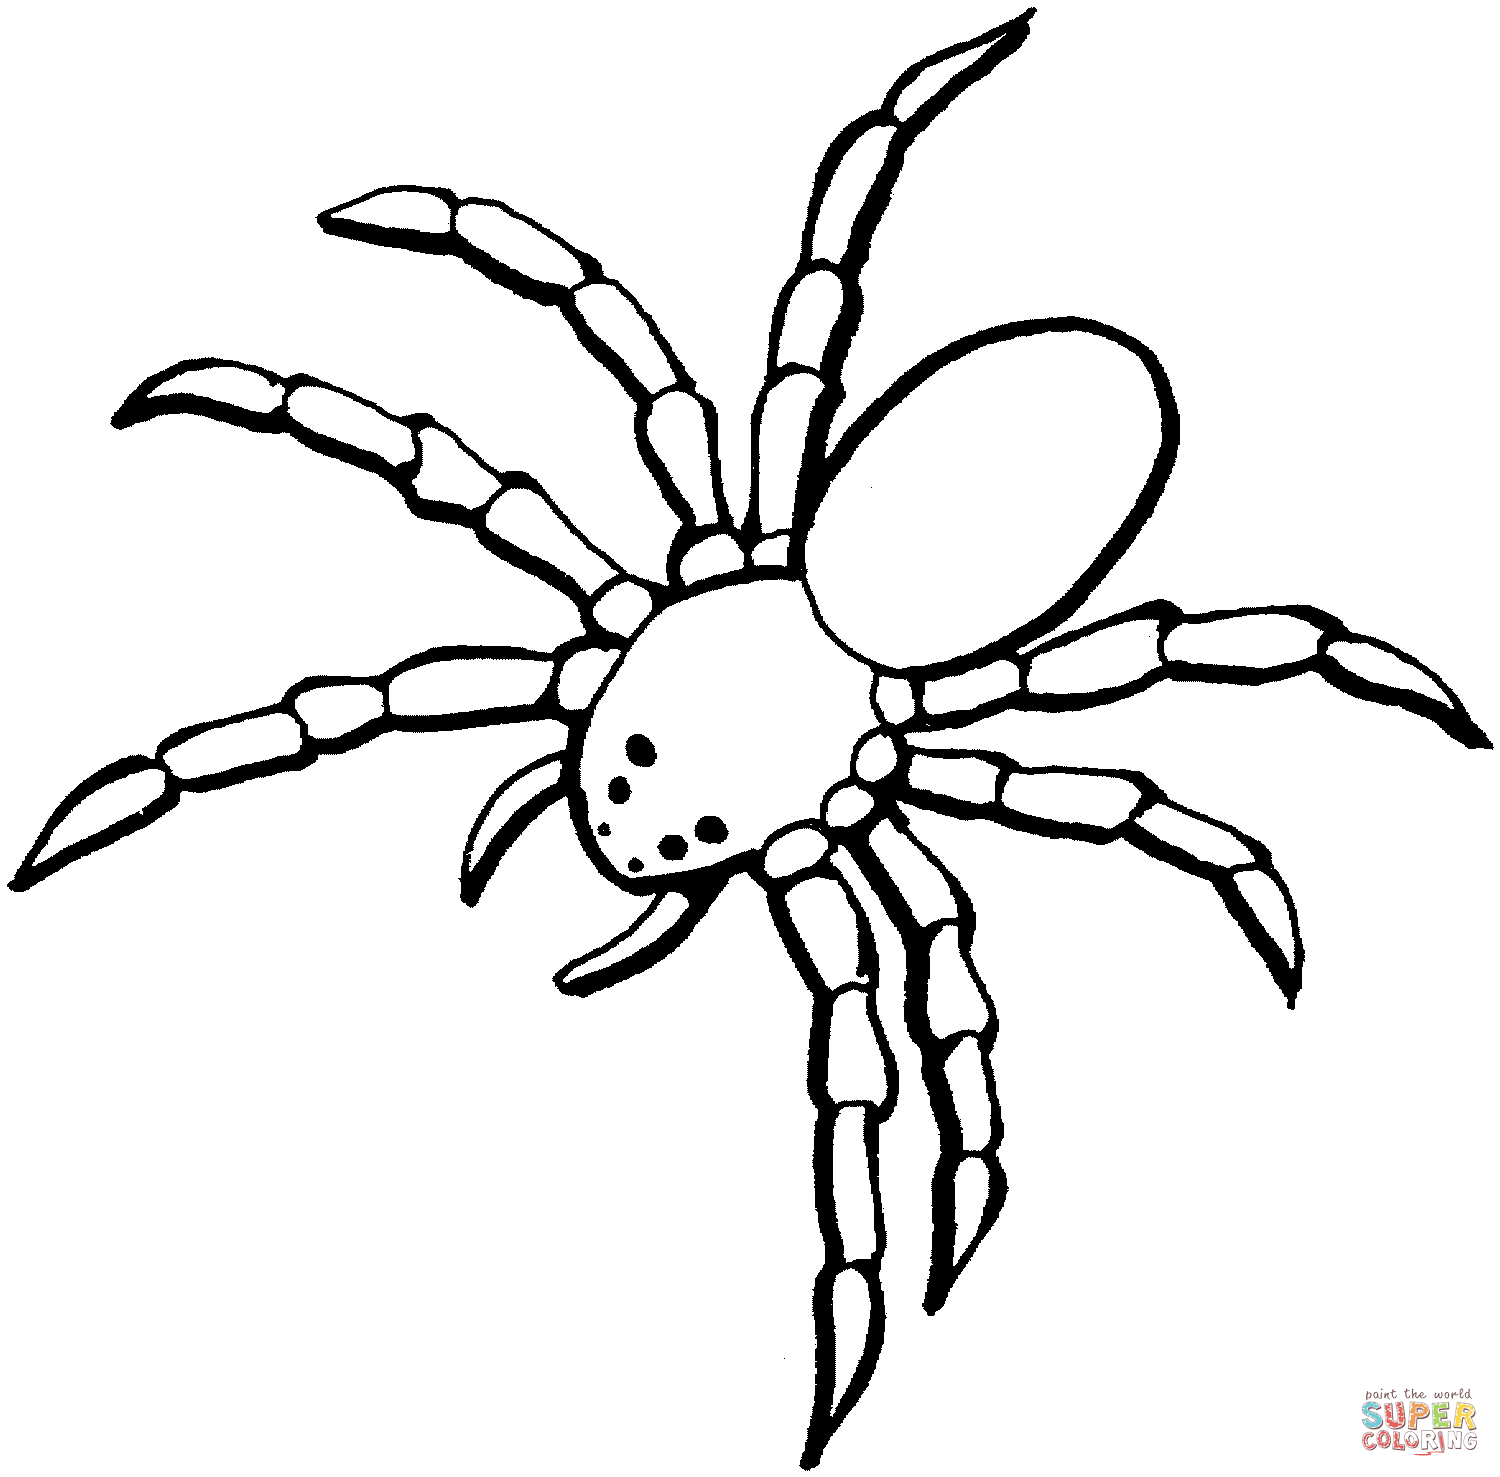 Spider coloring pages | Free Coloring Pages